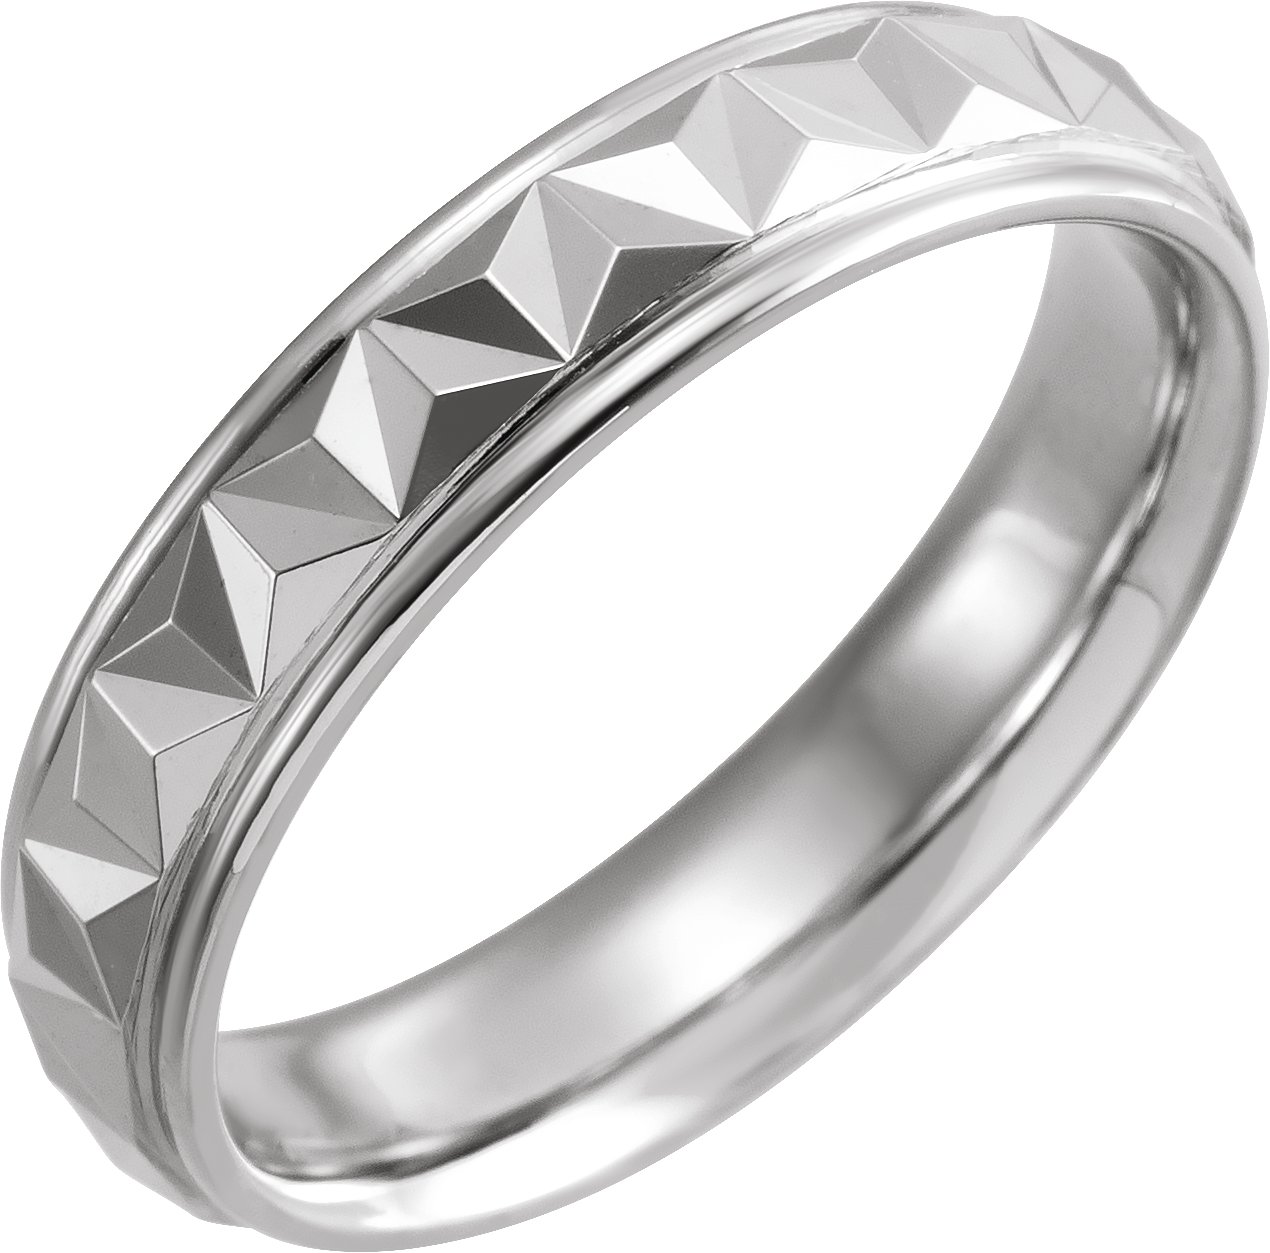 Sterling Silver 5 mm Geometric Band with Polished Finish Size 4